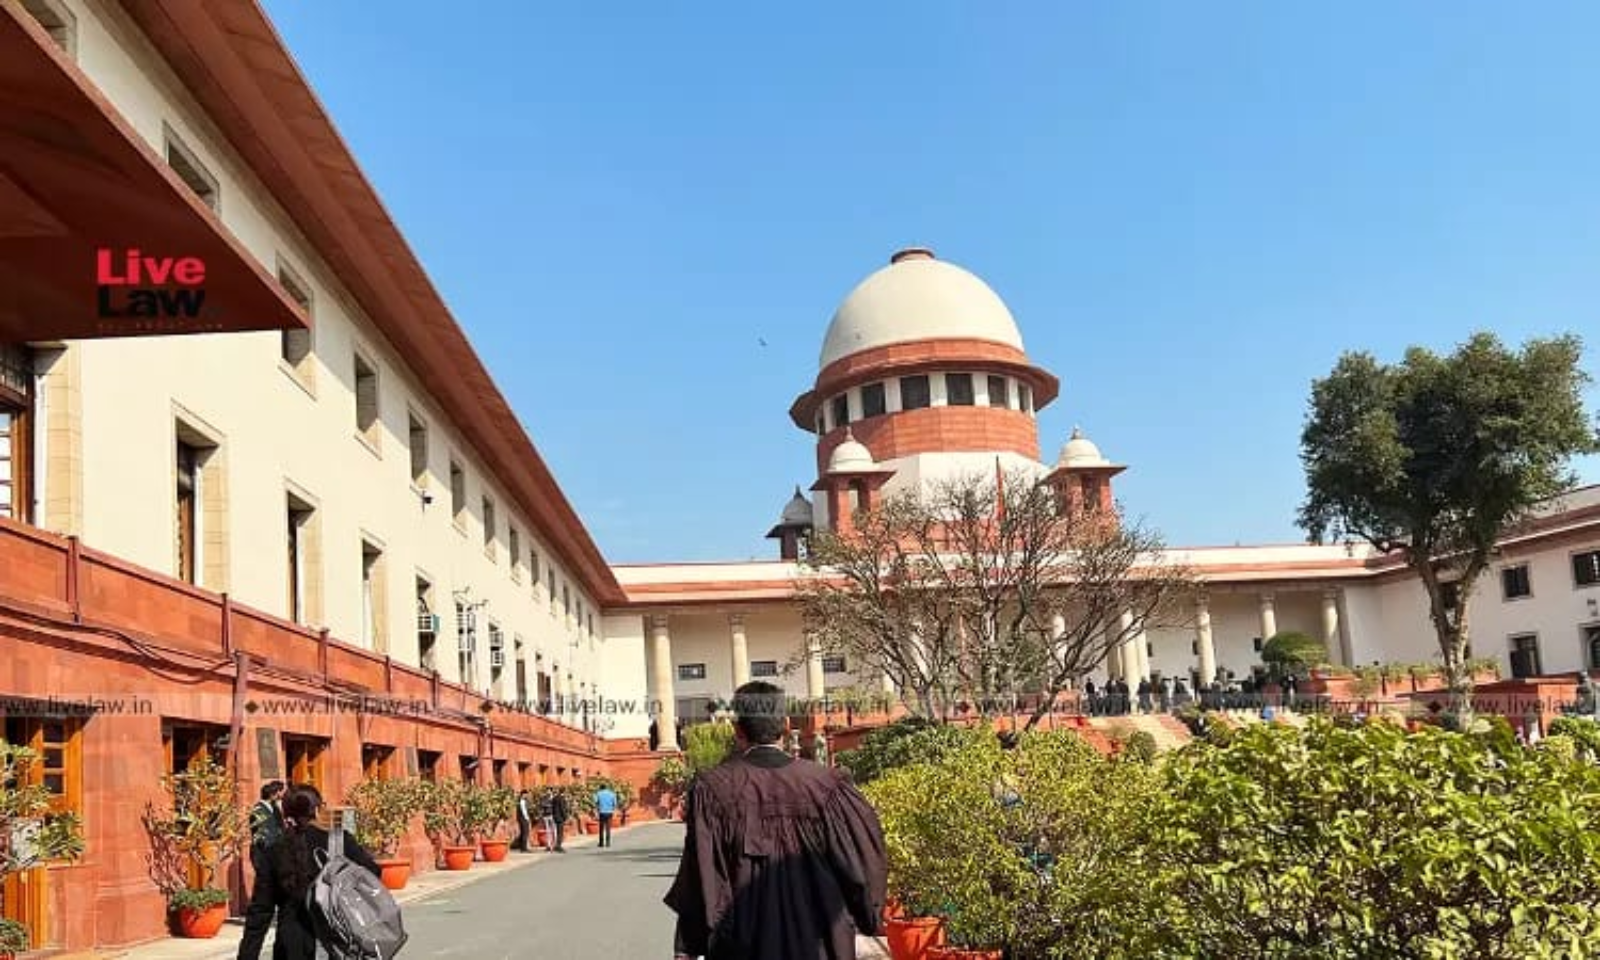 Xxx Reaping Video Downlod - Substantial Progress Made To Prevent Circulation Of Child Porn, Rape Videos  On Social Media': Supreme Court Closes PIL